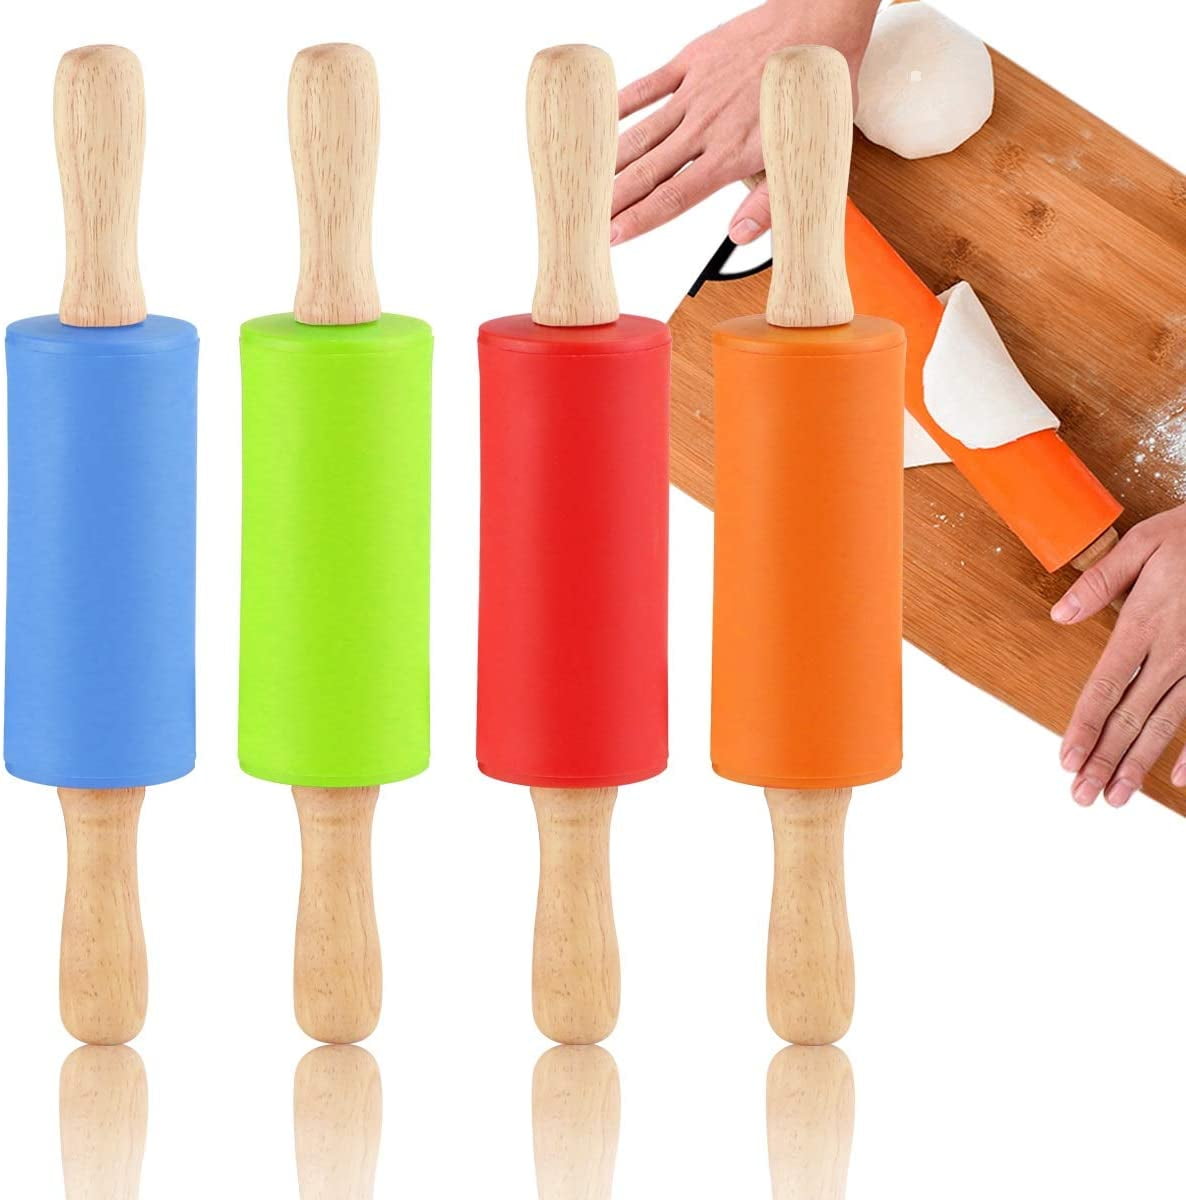 2 Pack Small Rolling Pins 9 Inch Kids Size Nonstick Silicone Rolling Pin with Wooden Handle for Home Kitchen Children Cake and Baking Red Blue 